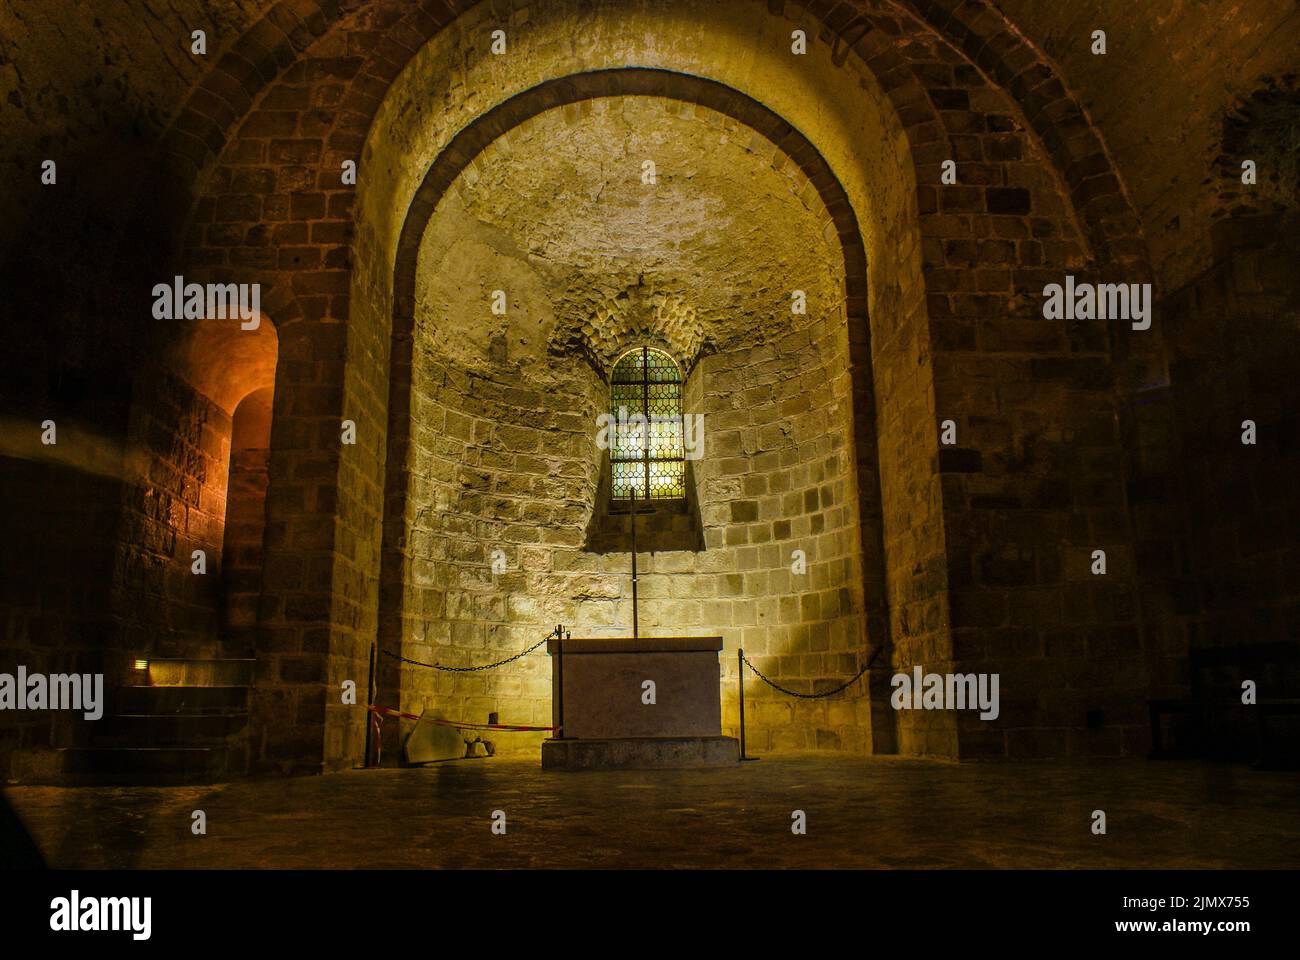 Mont-St-Michel monastery image (France Normandy) Stock Photo